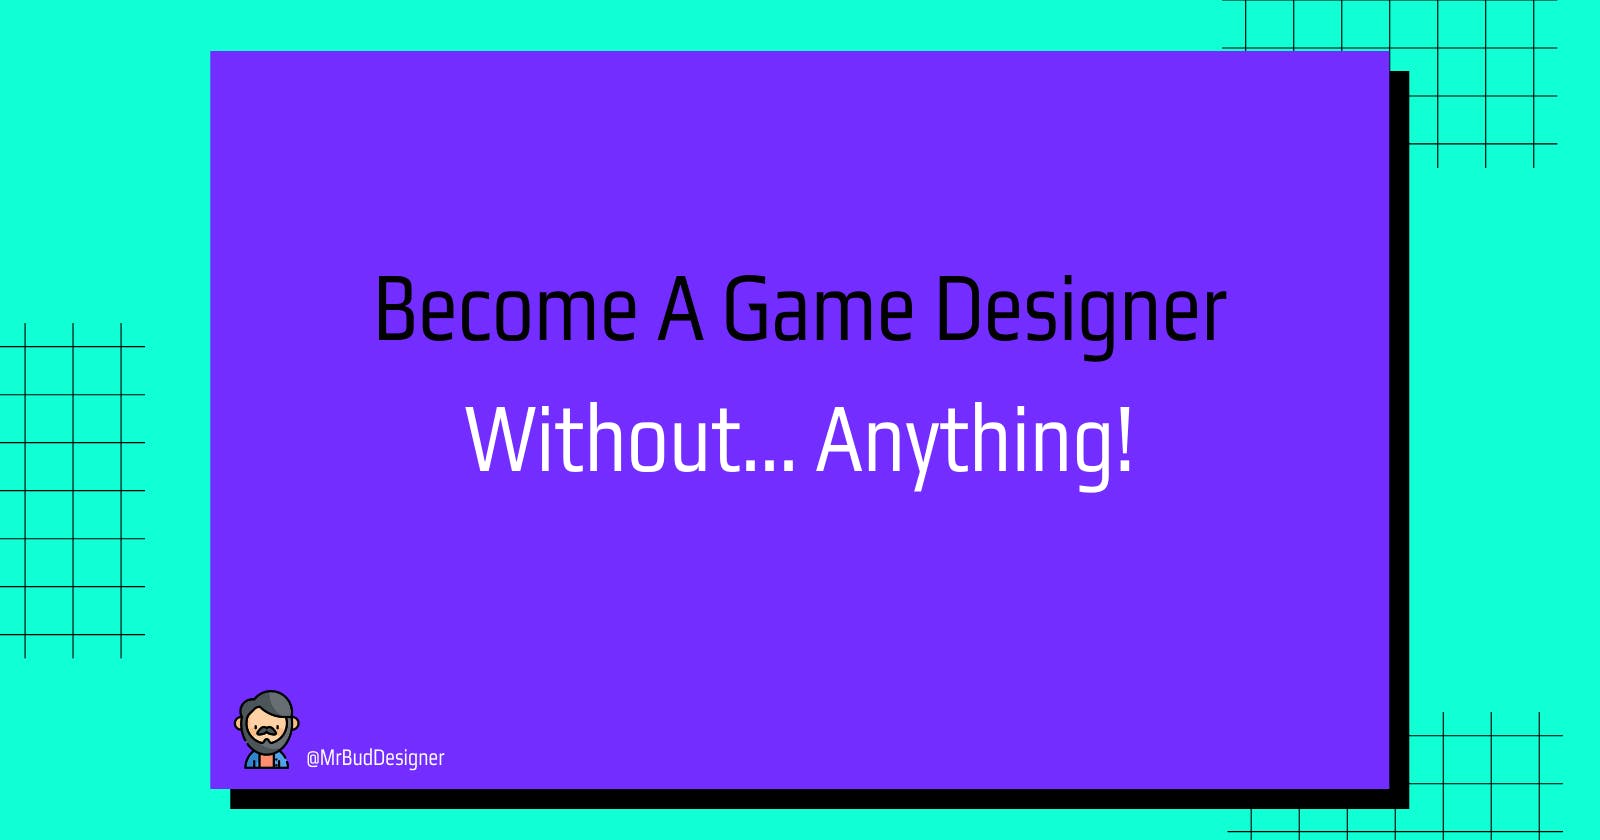 Become A Game Designer Without... Anything!